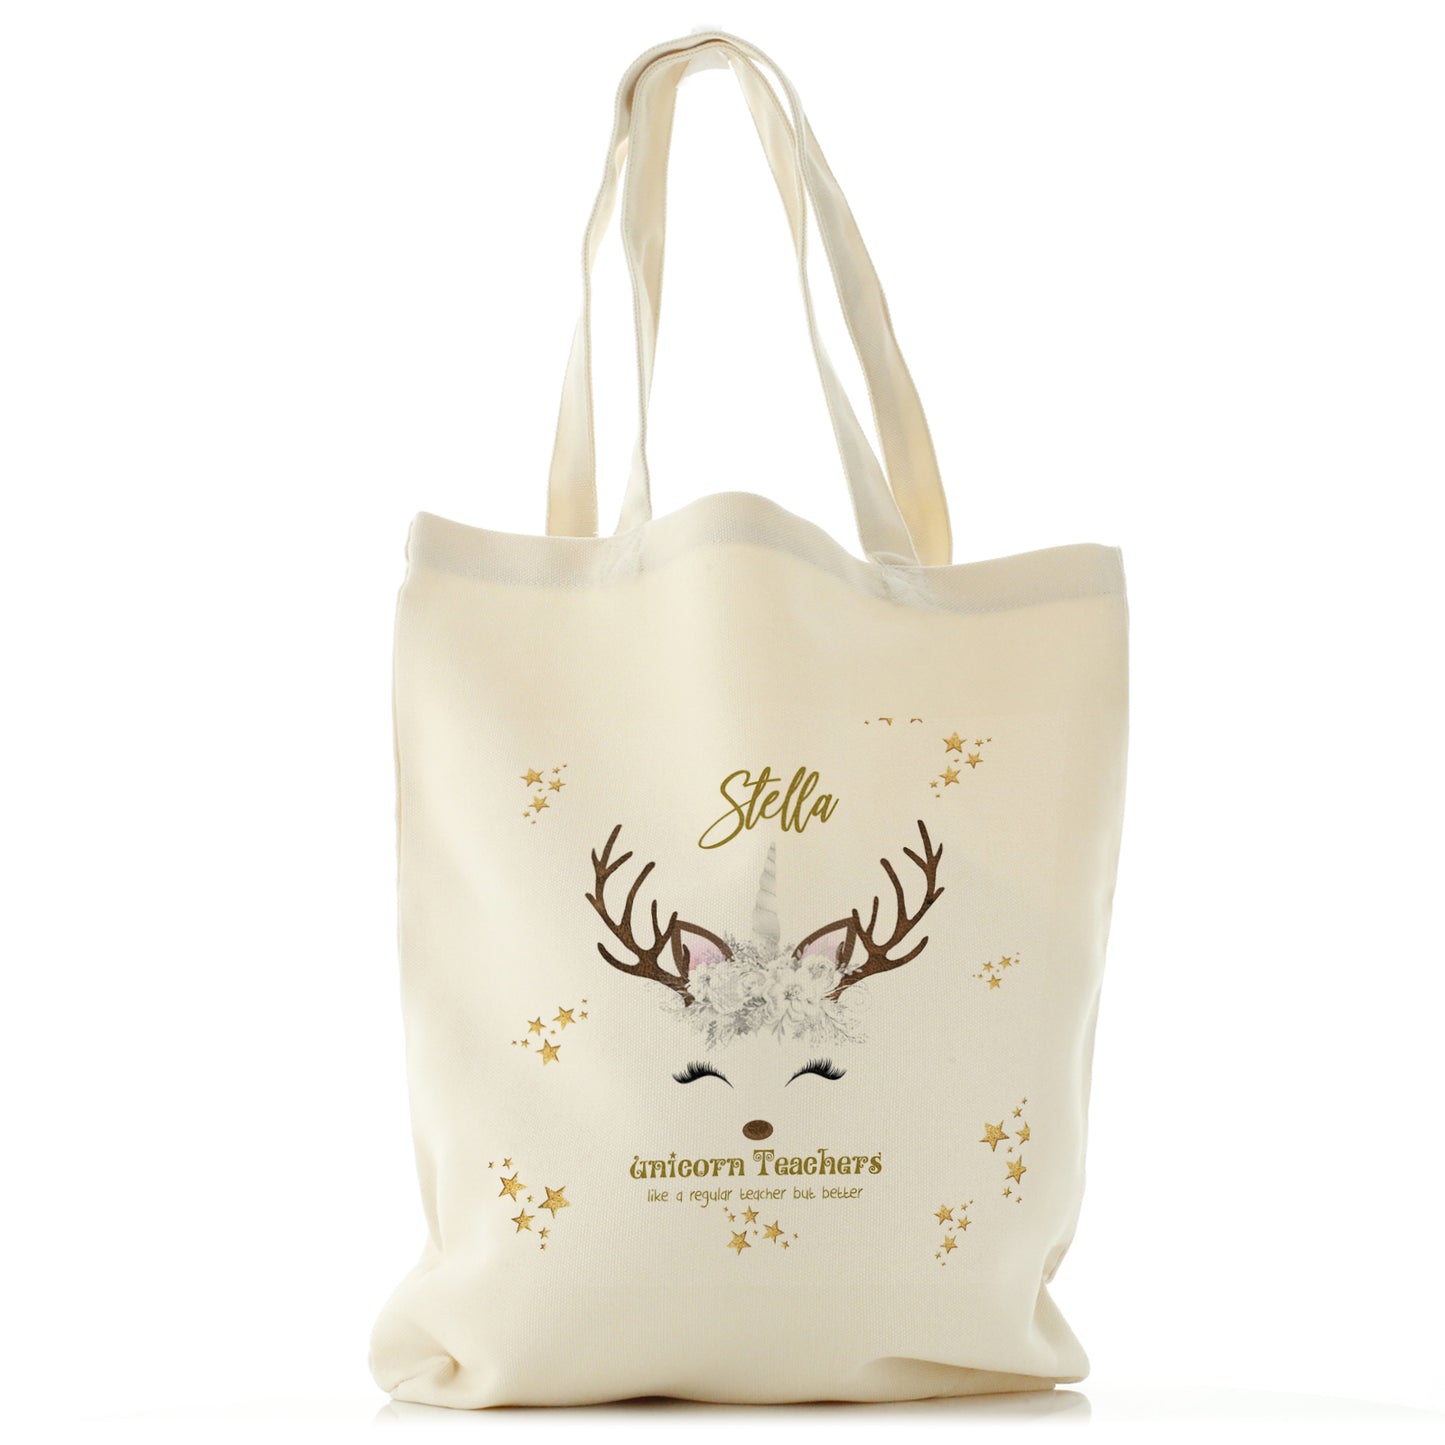 Personalised Canvas Tote Bag with Teachers Name and White Reindeer Unicorn